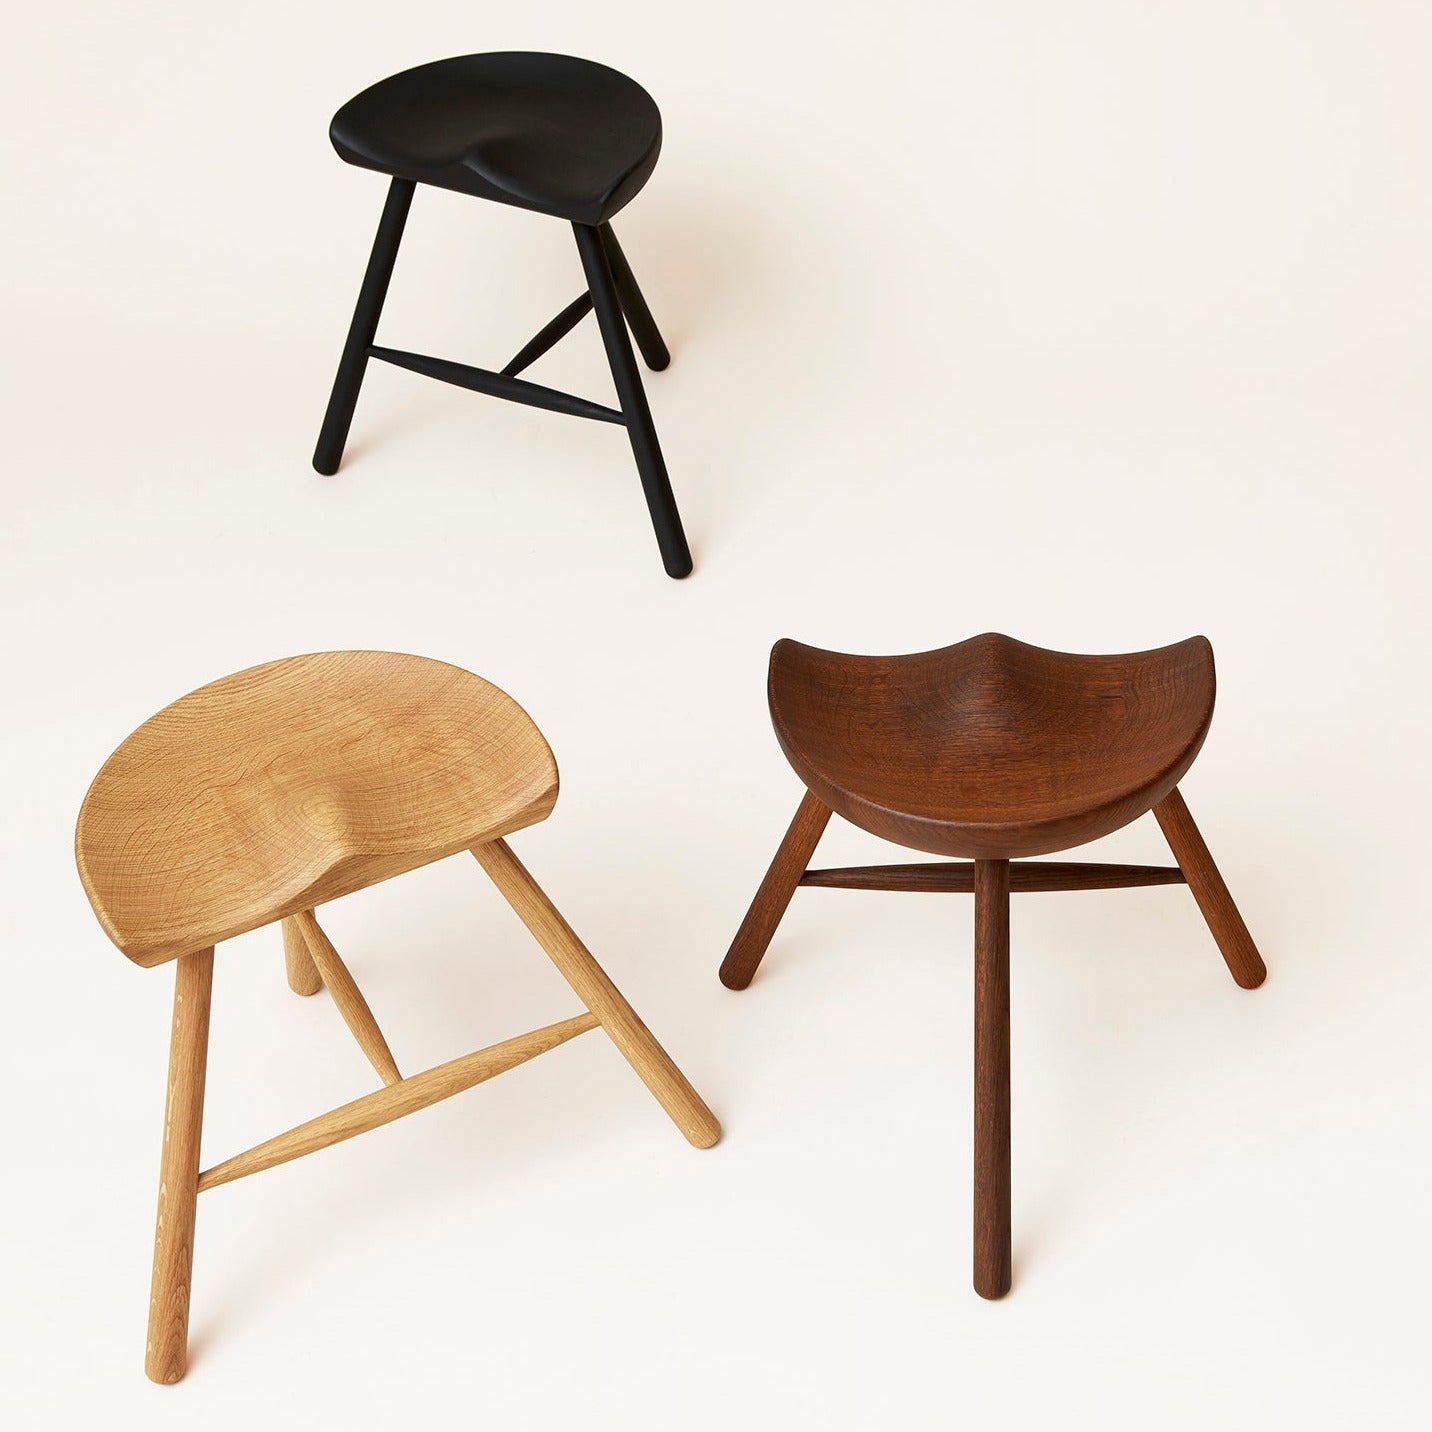 Three SHOEMAKER Chairs, black, natural and brown. made of oak or beech